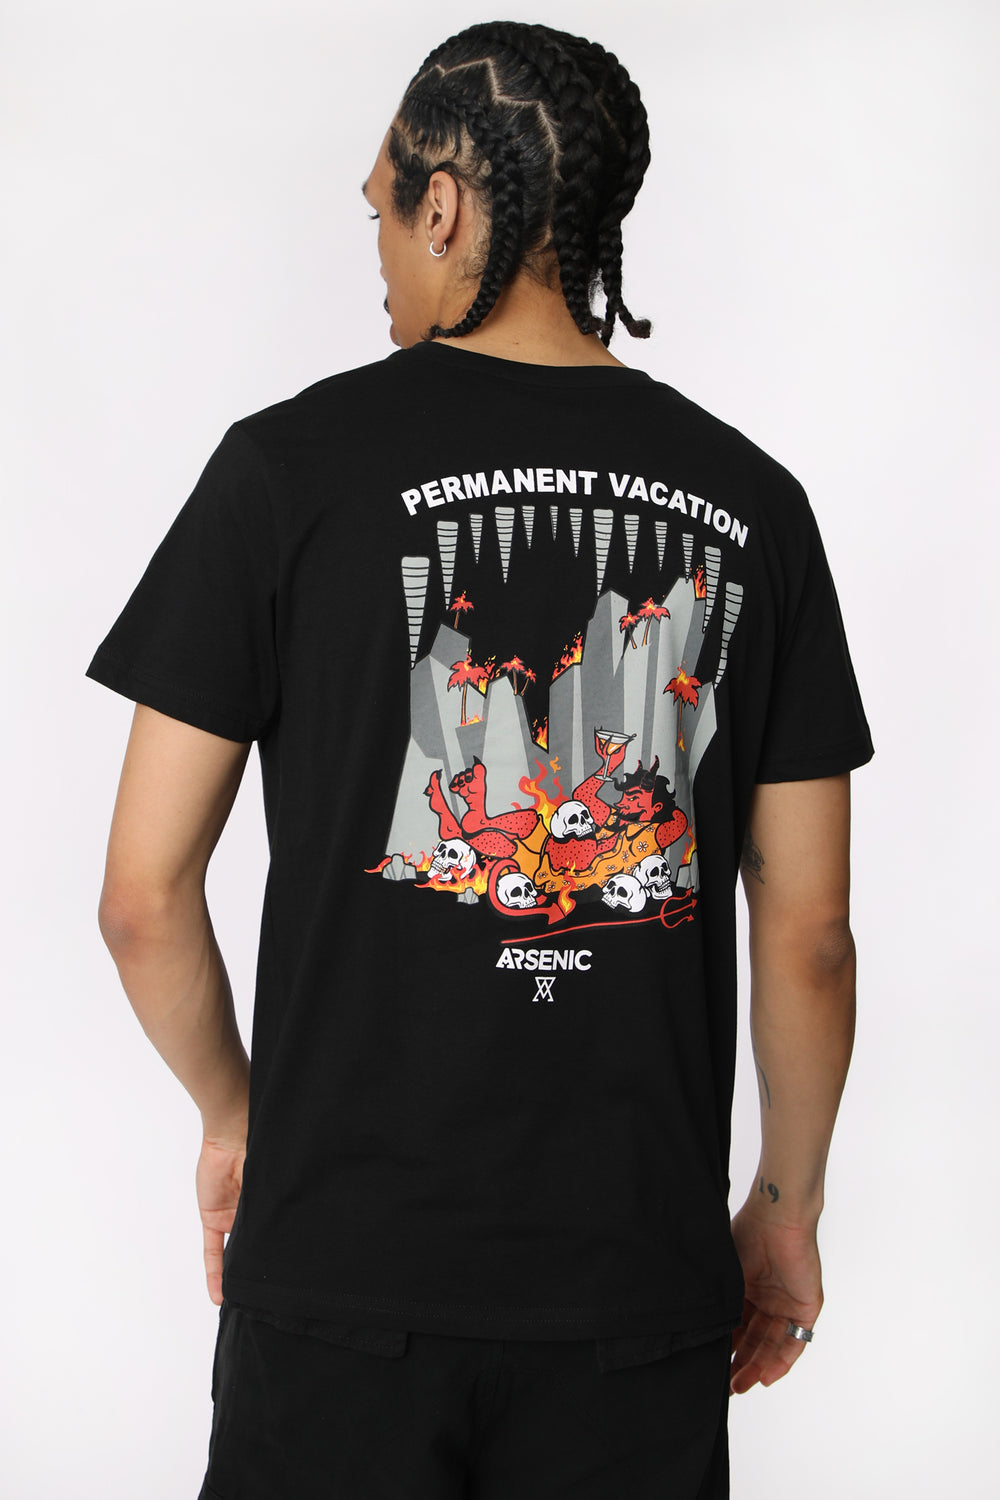 T-Shirt Permanent Vacation Arsenic Homme T-Shirt Permanent Vacation Arsenic Homme